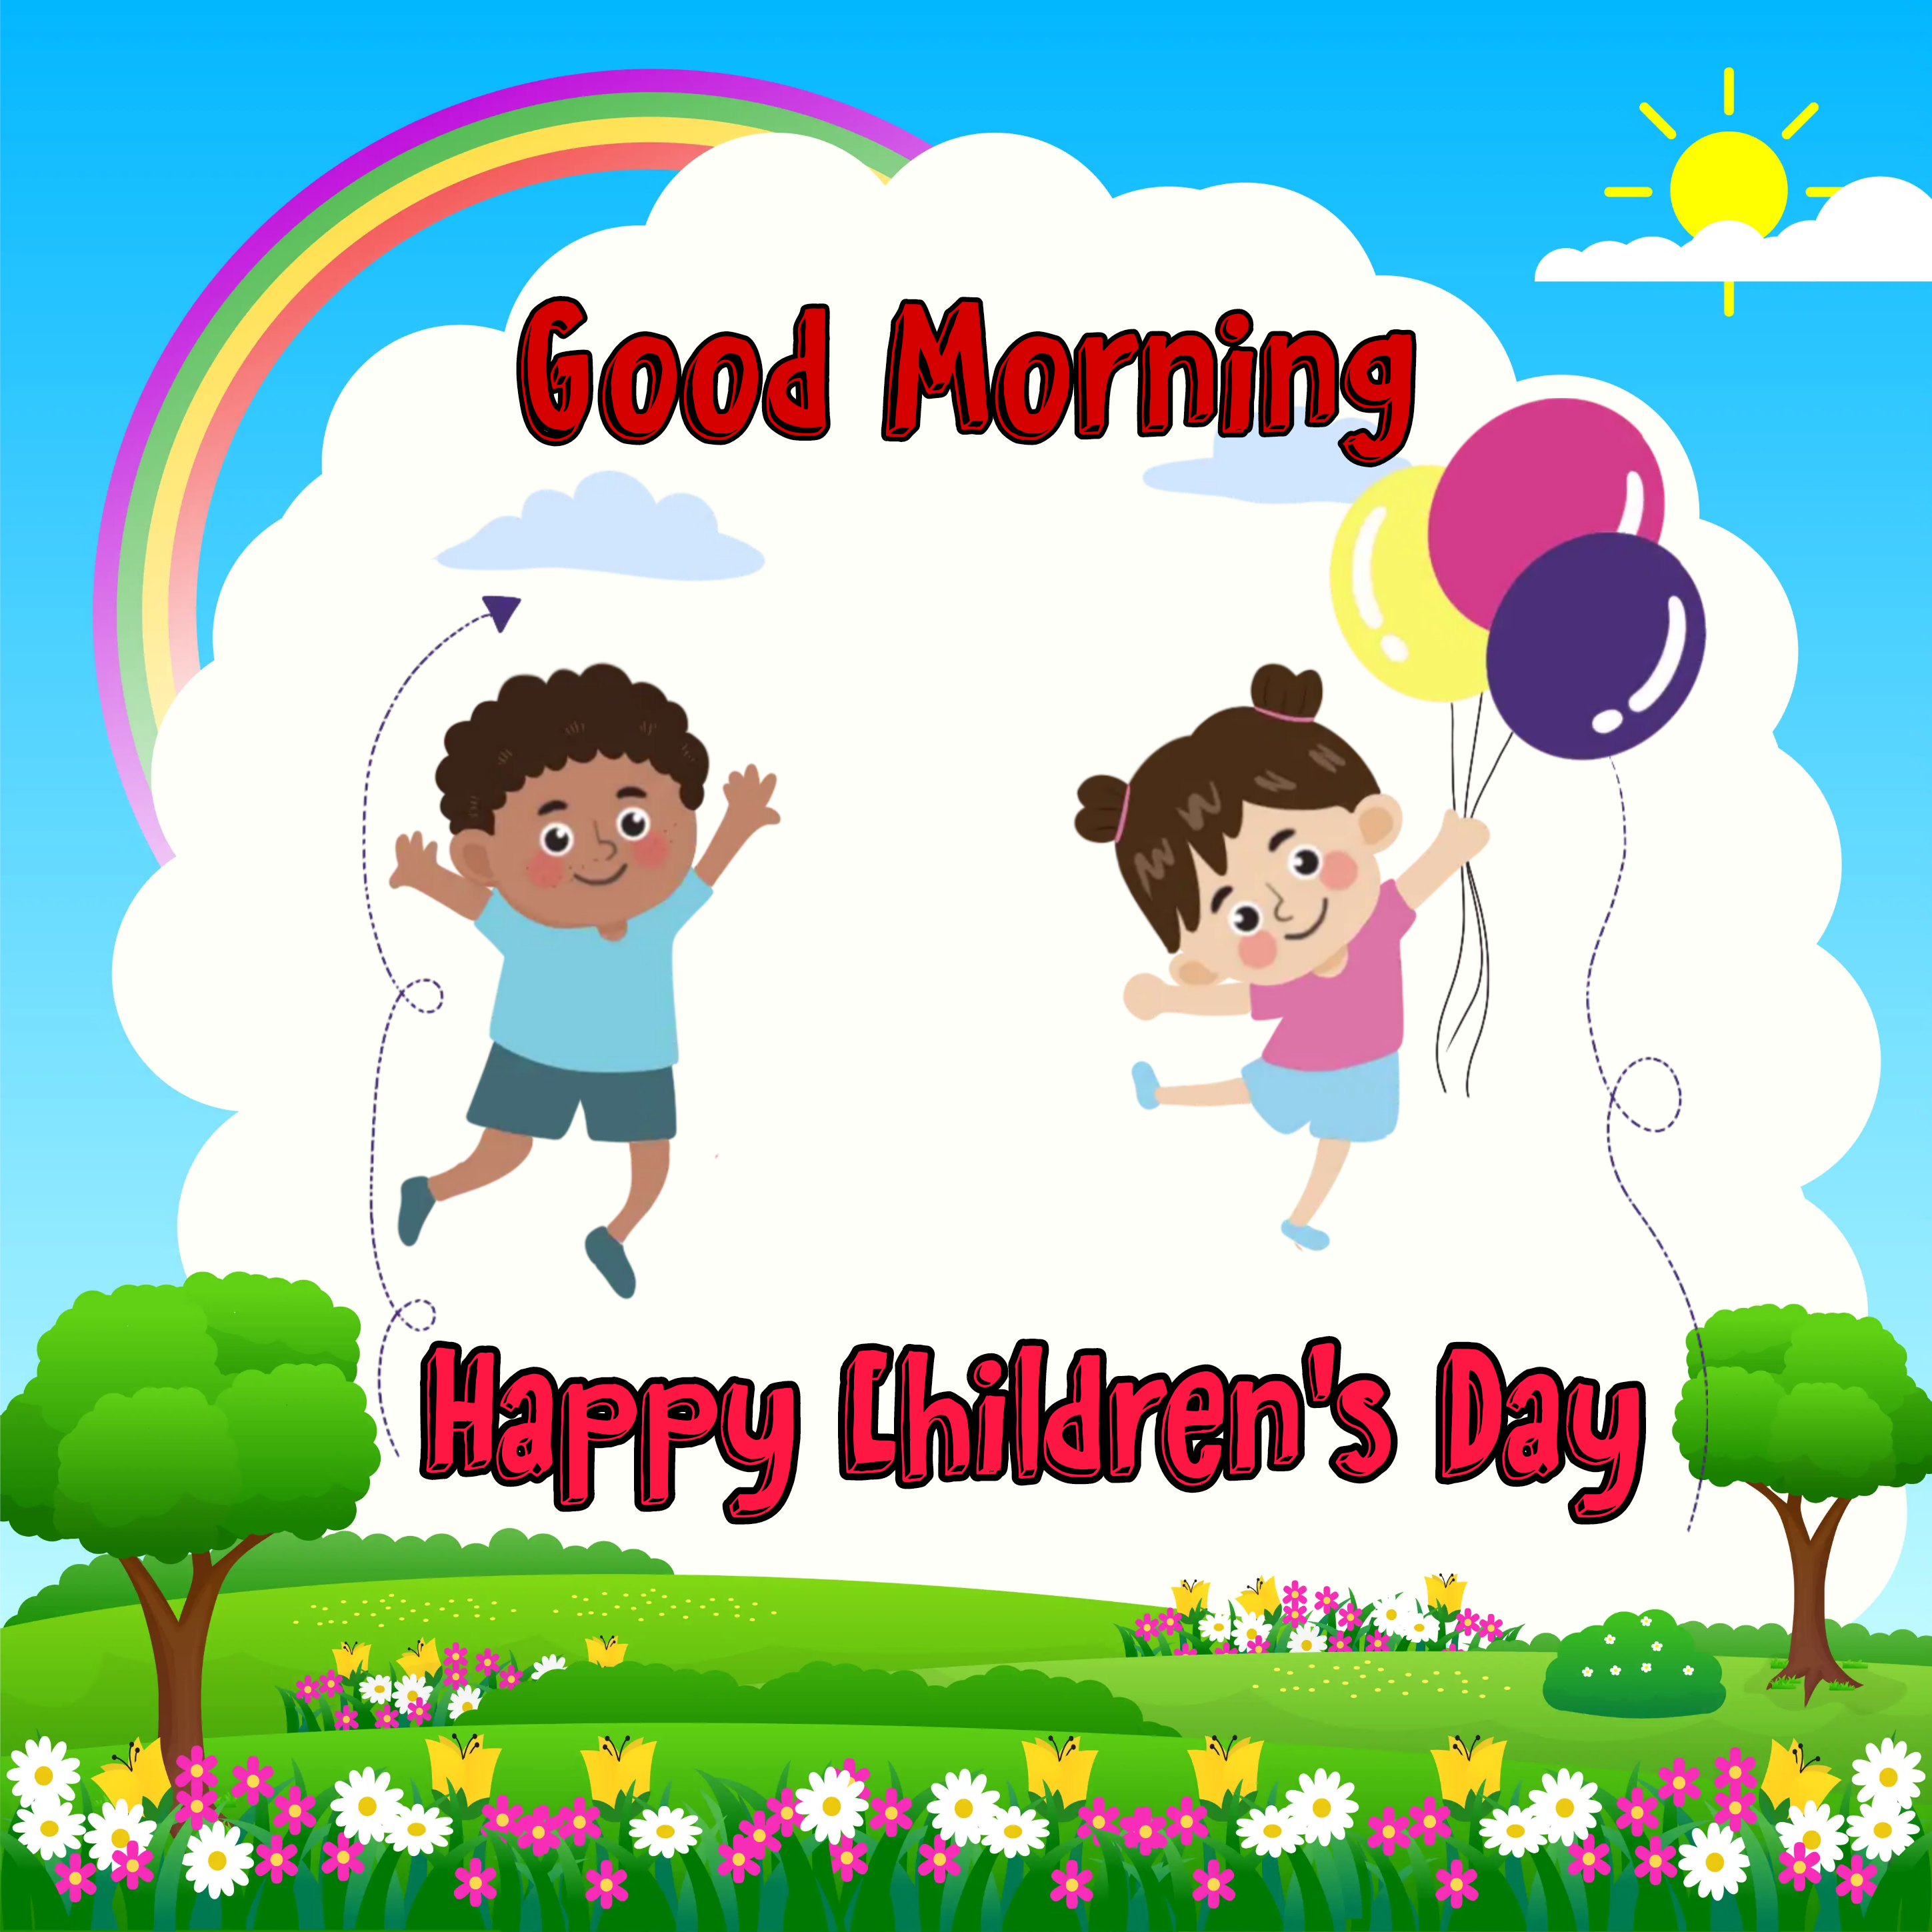 Good Morning Happy Childrens Day Images